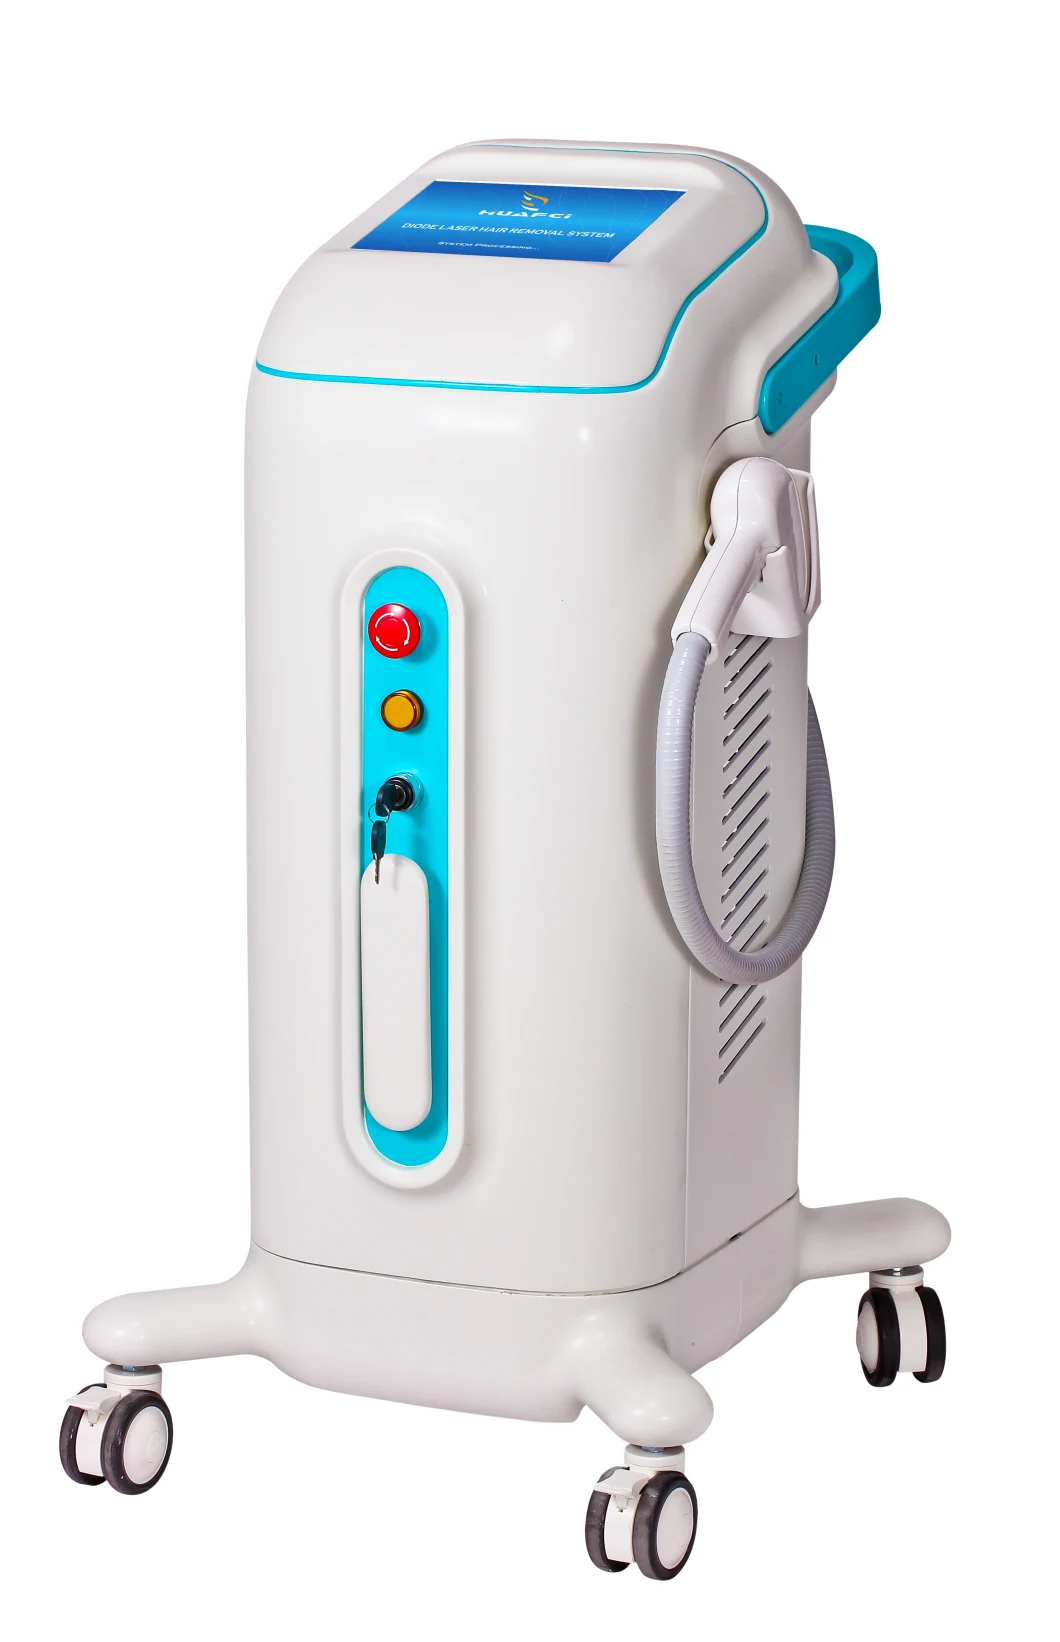 808nm Diode Laser Skin Hair Removal Painless Salon Beauty Equipment